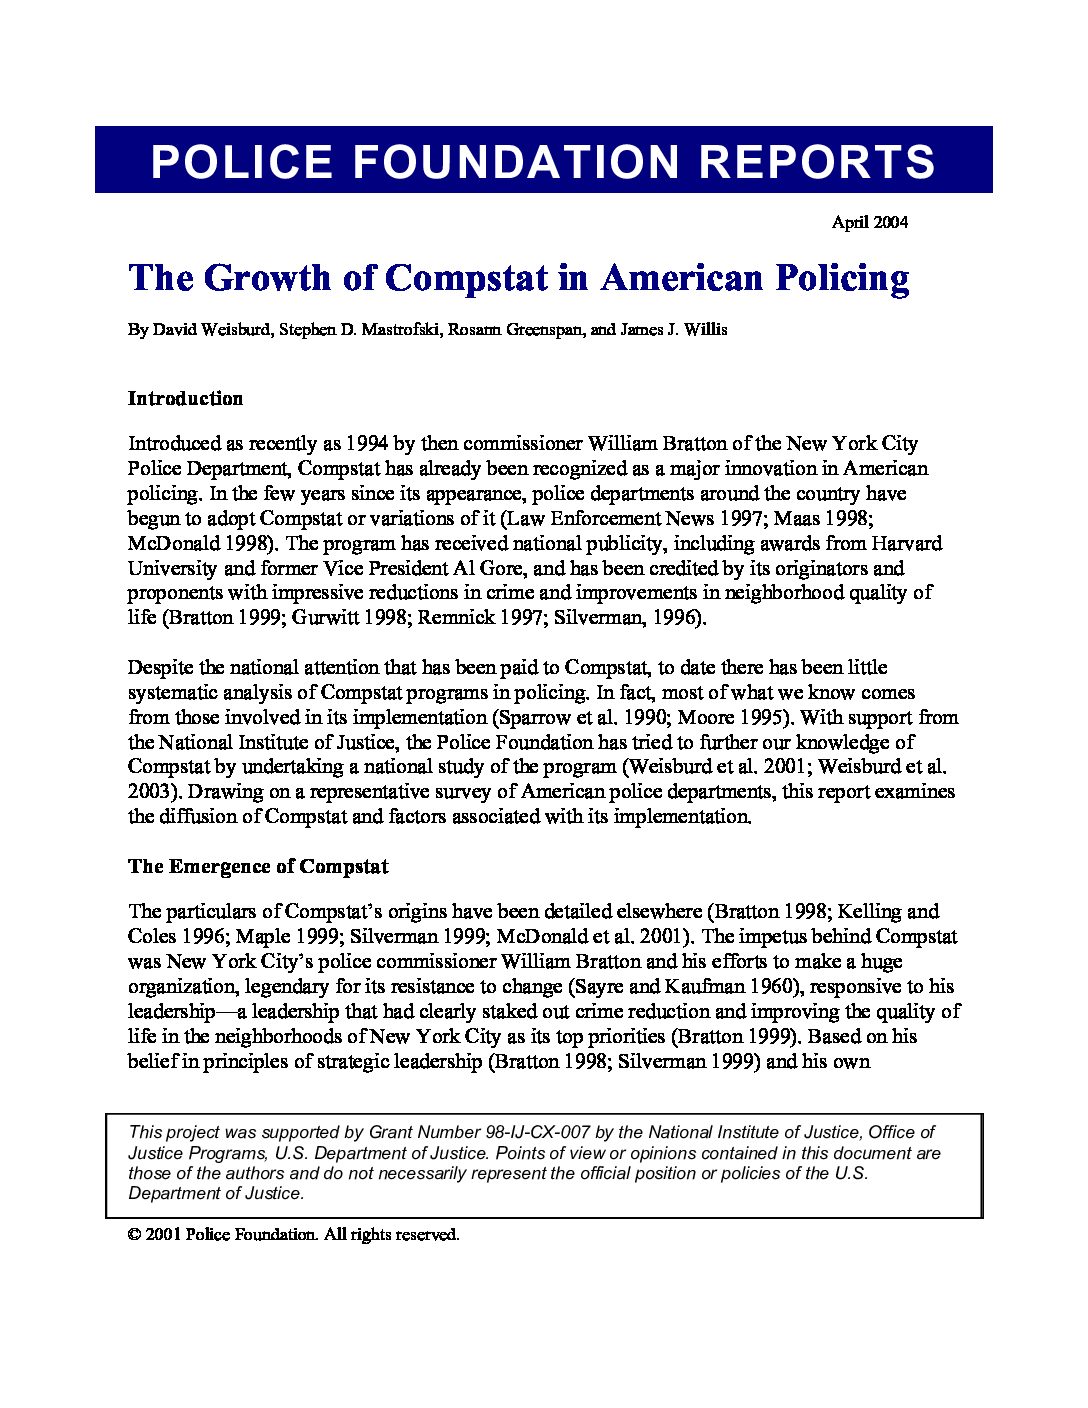 Weisburd-et-al.-2004-The-Growth-of-Compstat-in-American-Policing-Police-Foundation-Report_0-pdf